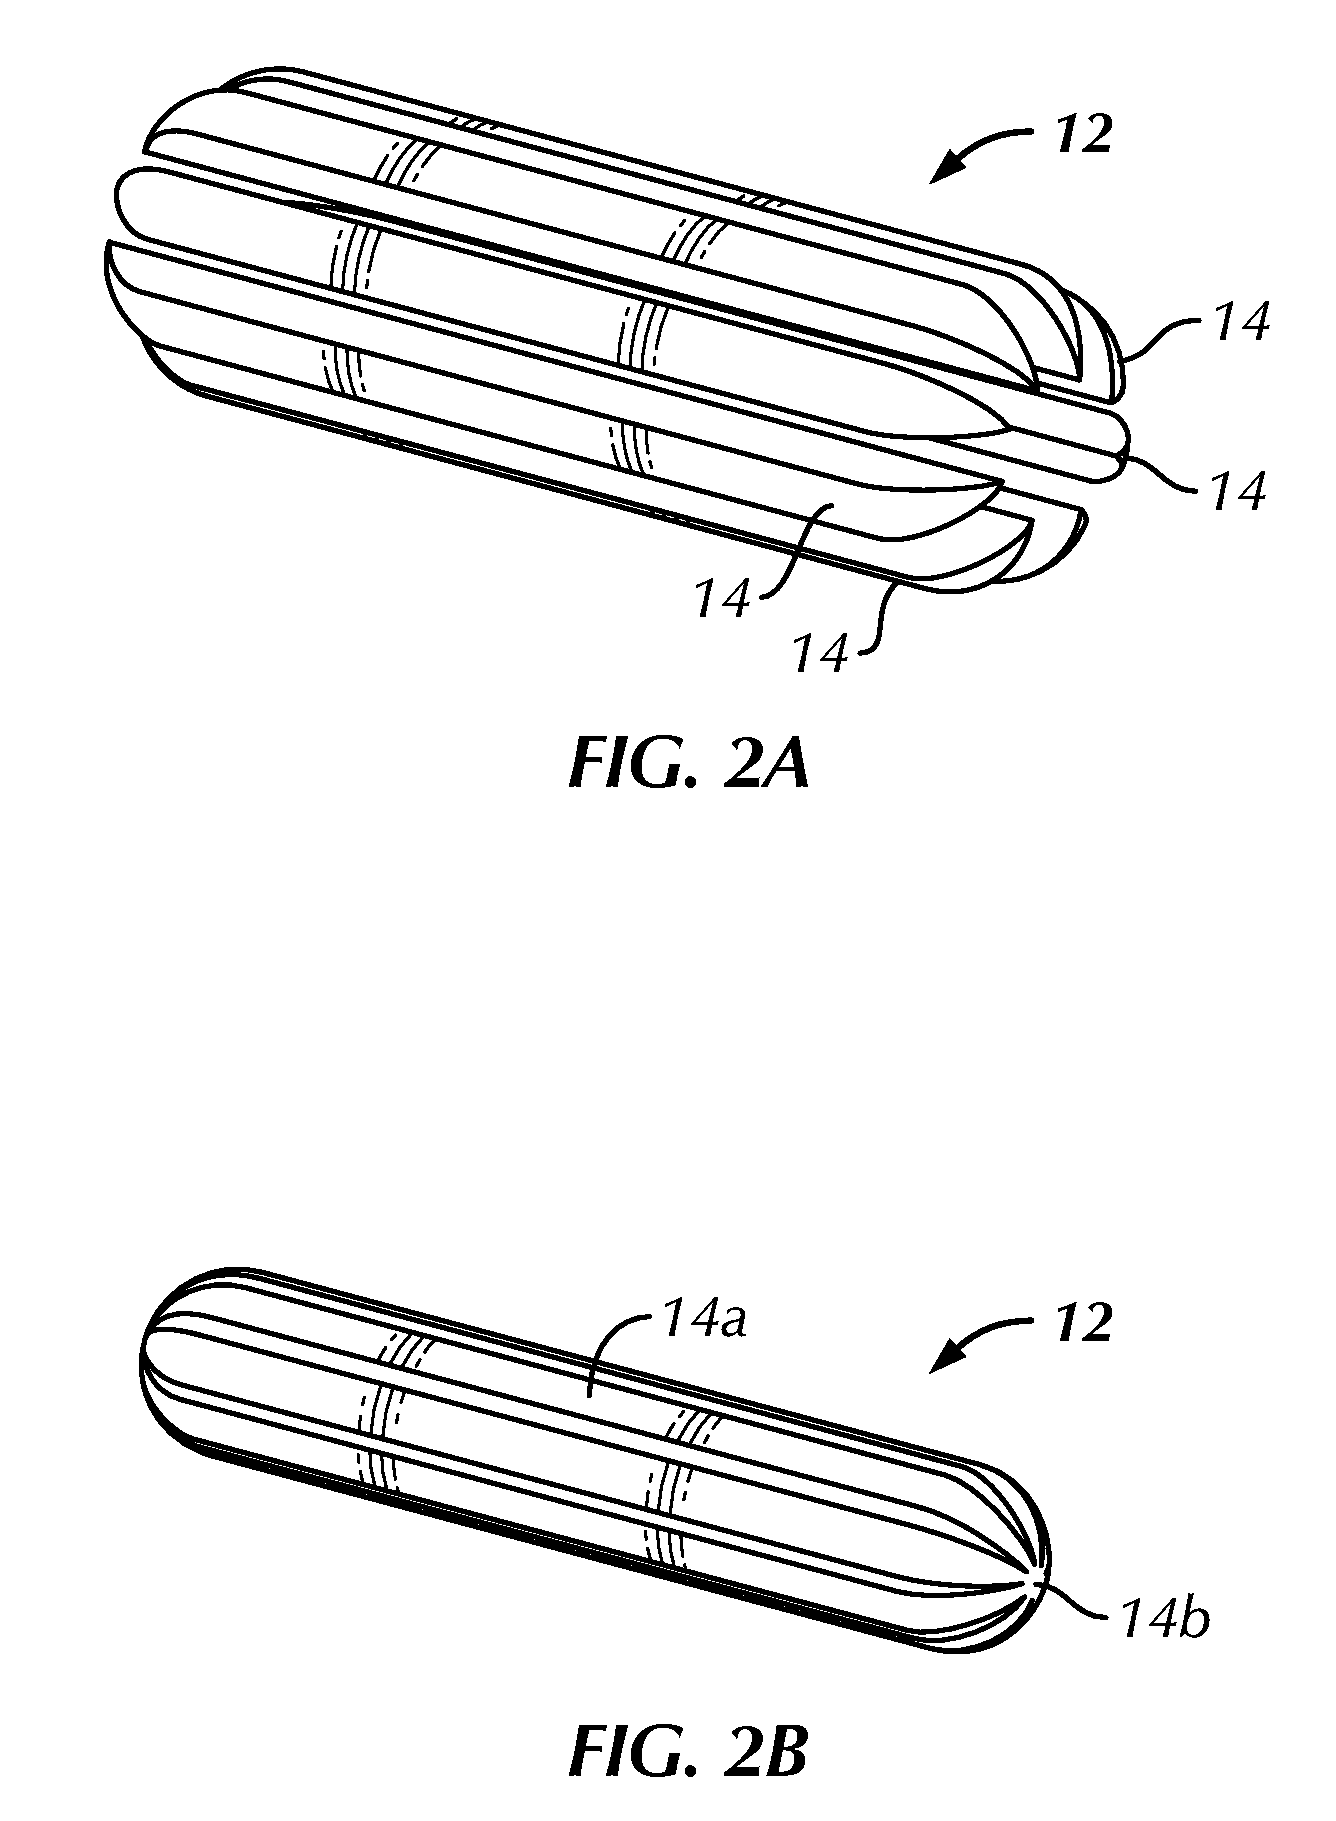 Apparatus for cutting elongated meat